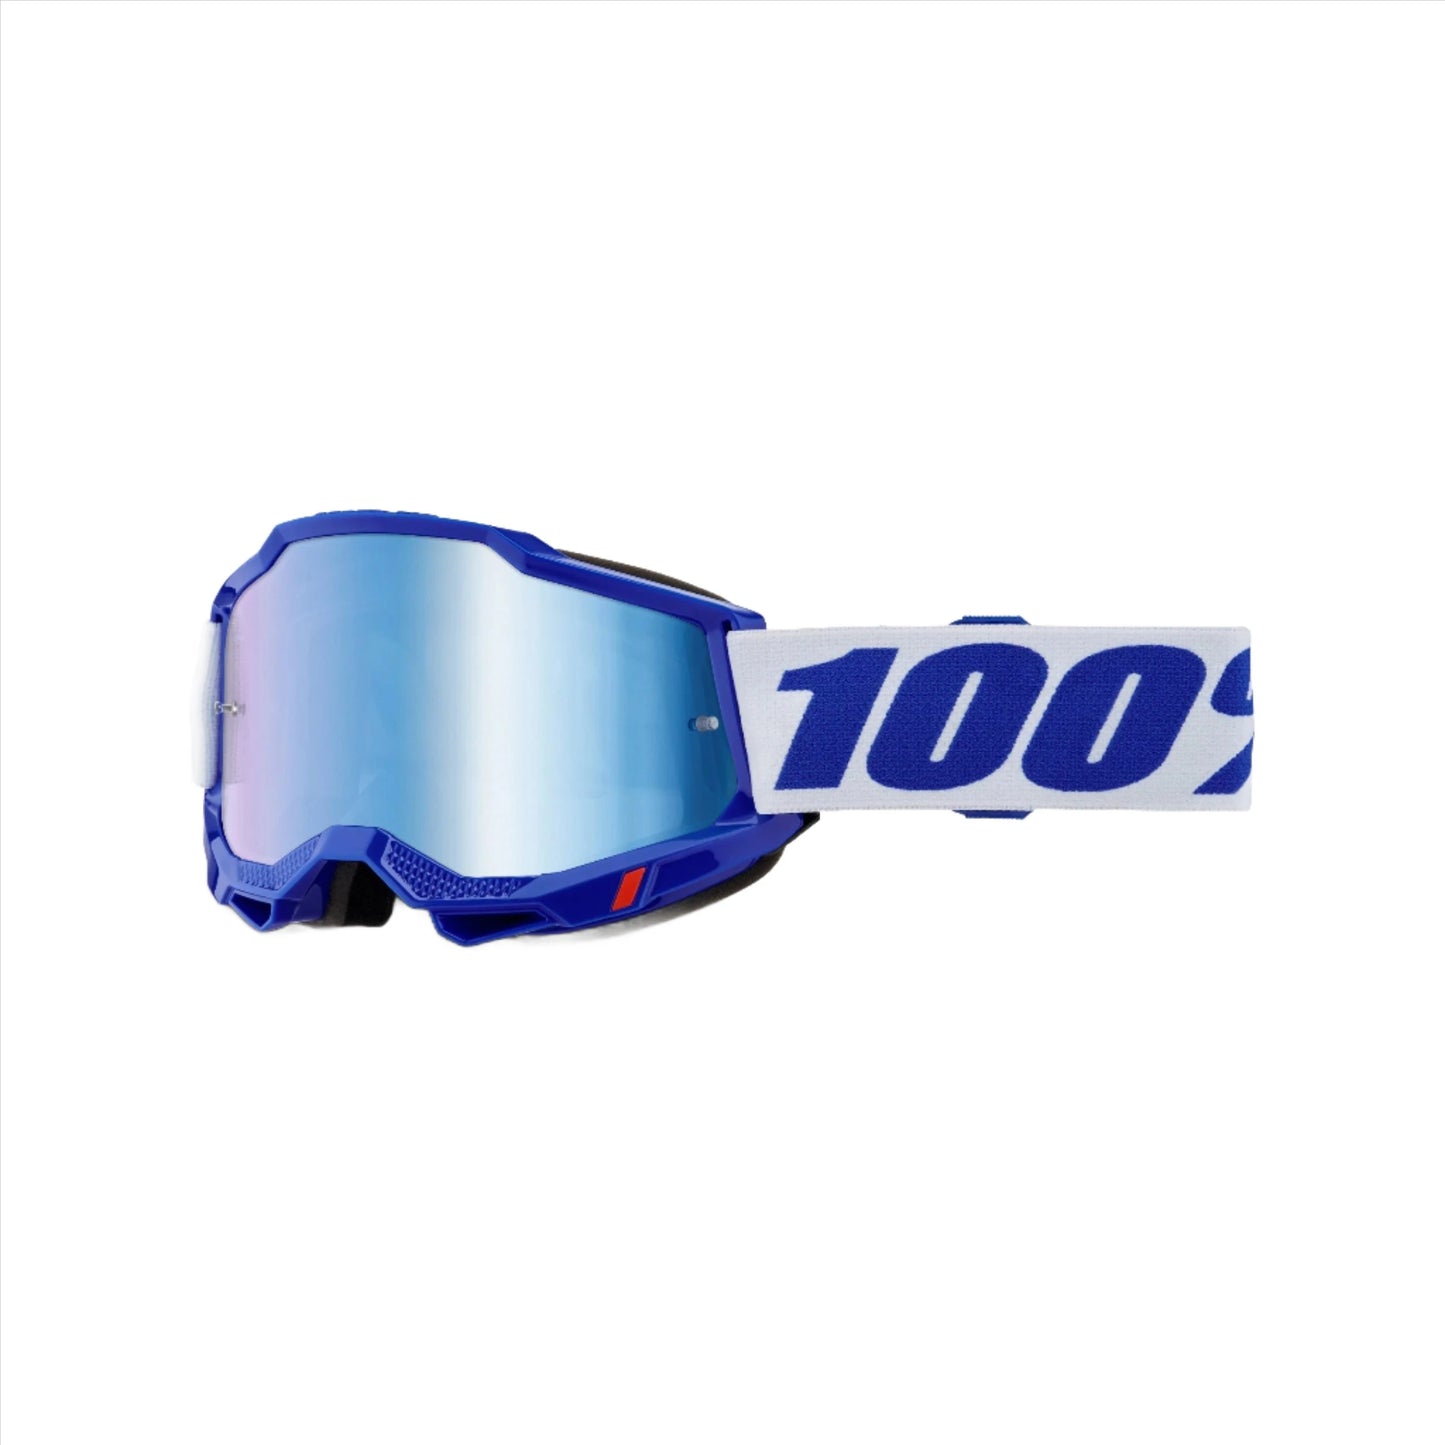 100 Percent Accuri 2 Goggles - One Size Fits Most - Blue - Mirror Blue Lens